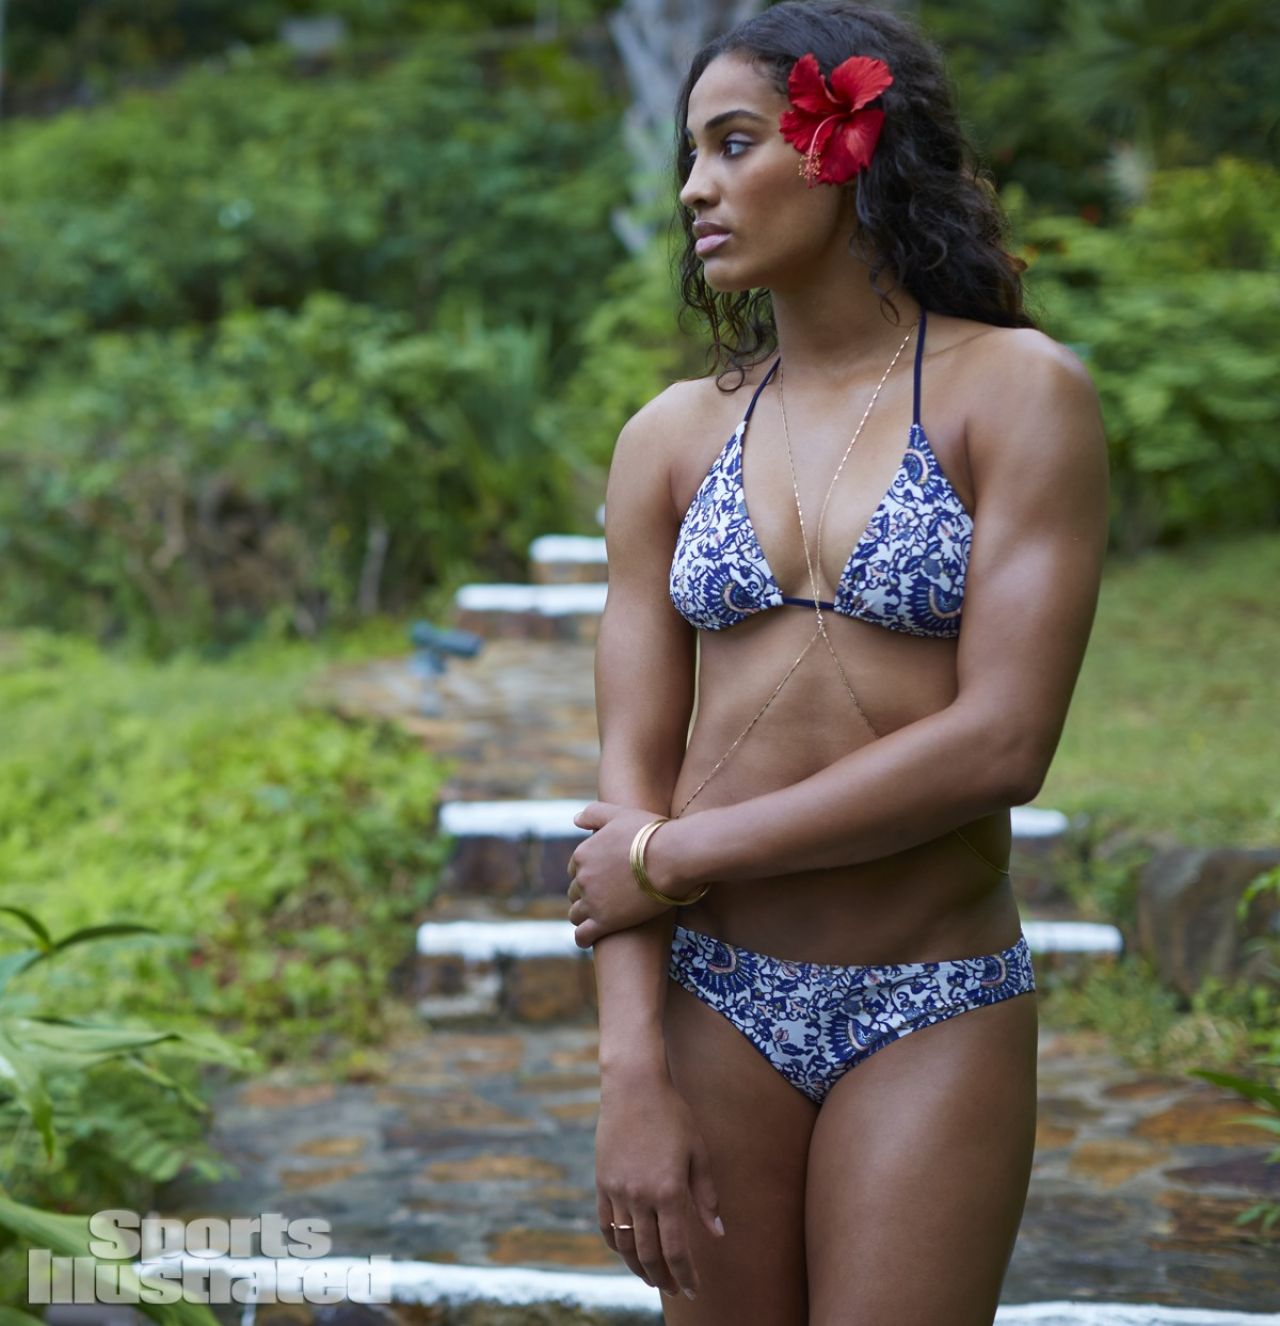 Skylar Diggins Sports Illustrated 2014 Swimsuit Issue